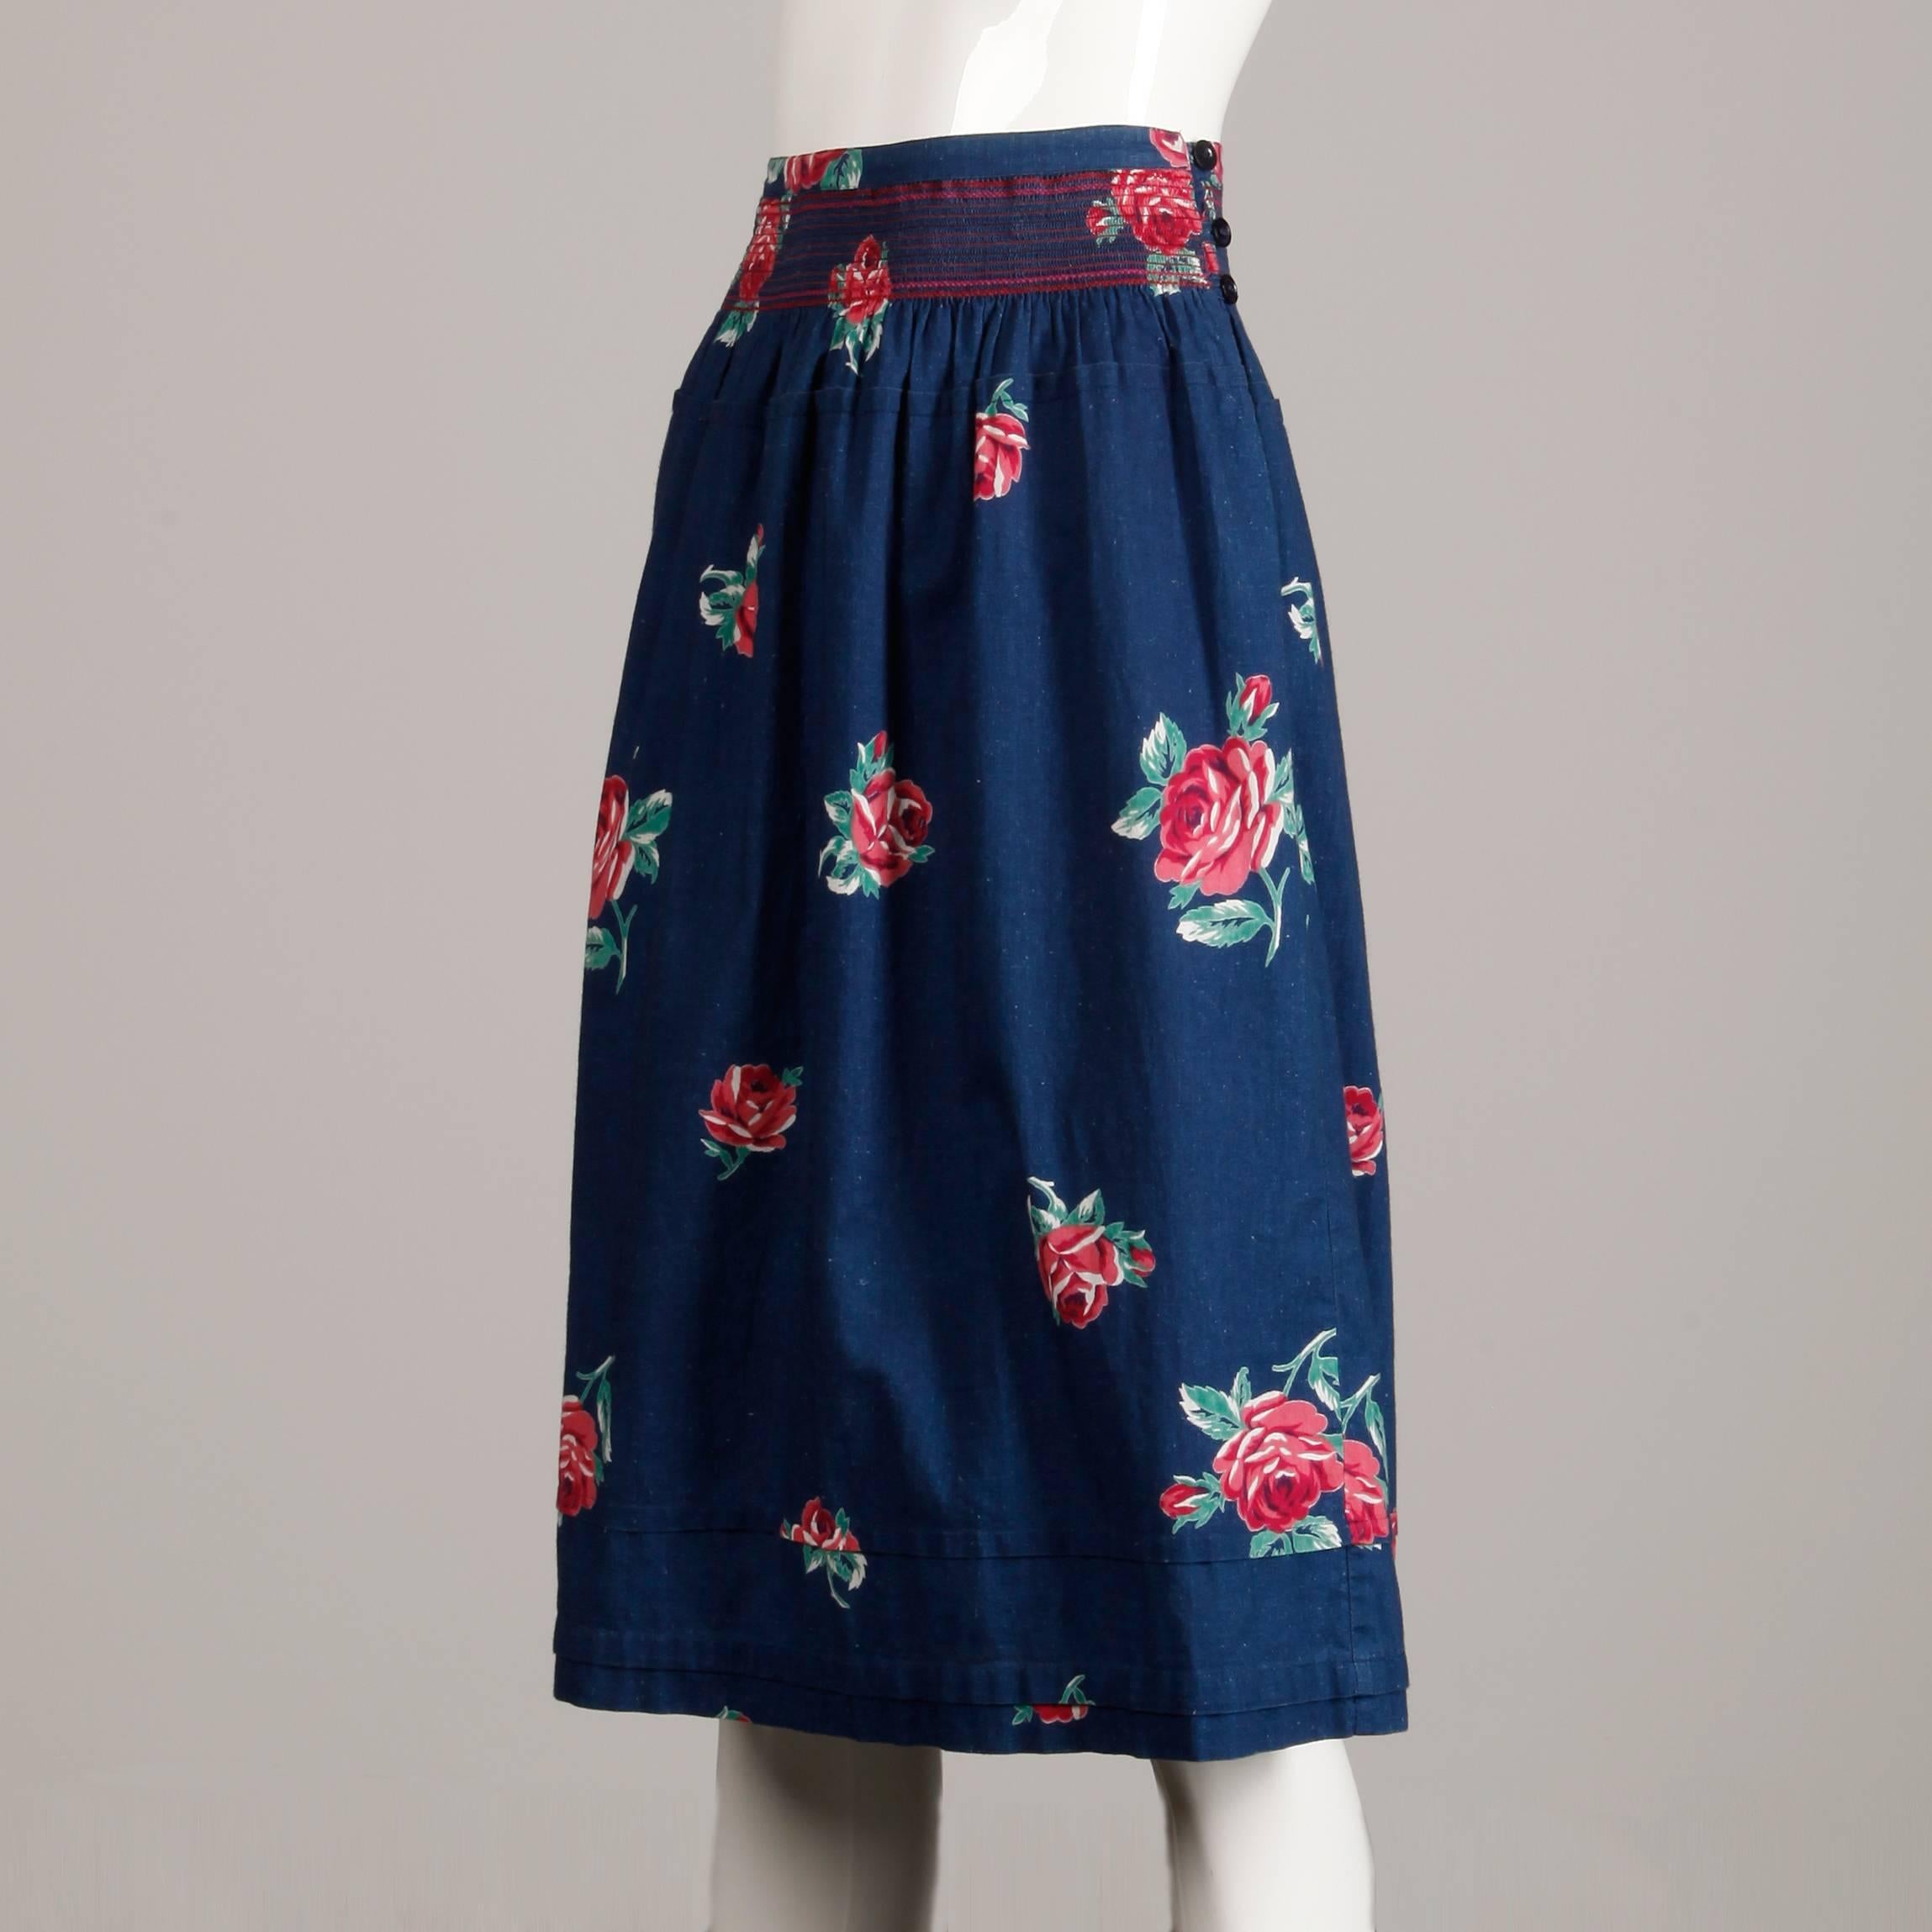 1970s Kenzo Vintage Blue Denim Chambray Jeans Skirt with Floral Rose Print In Excellent Condition For Sale In Sparks, NV